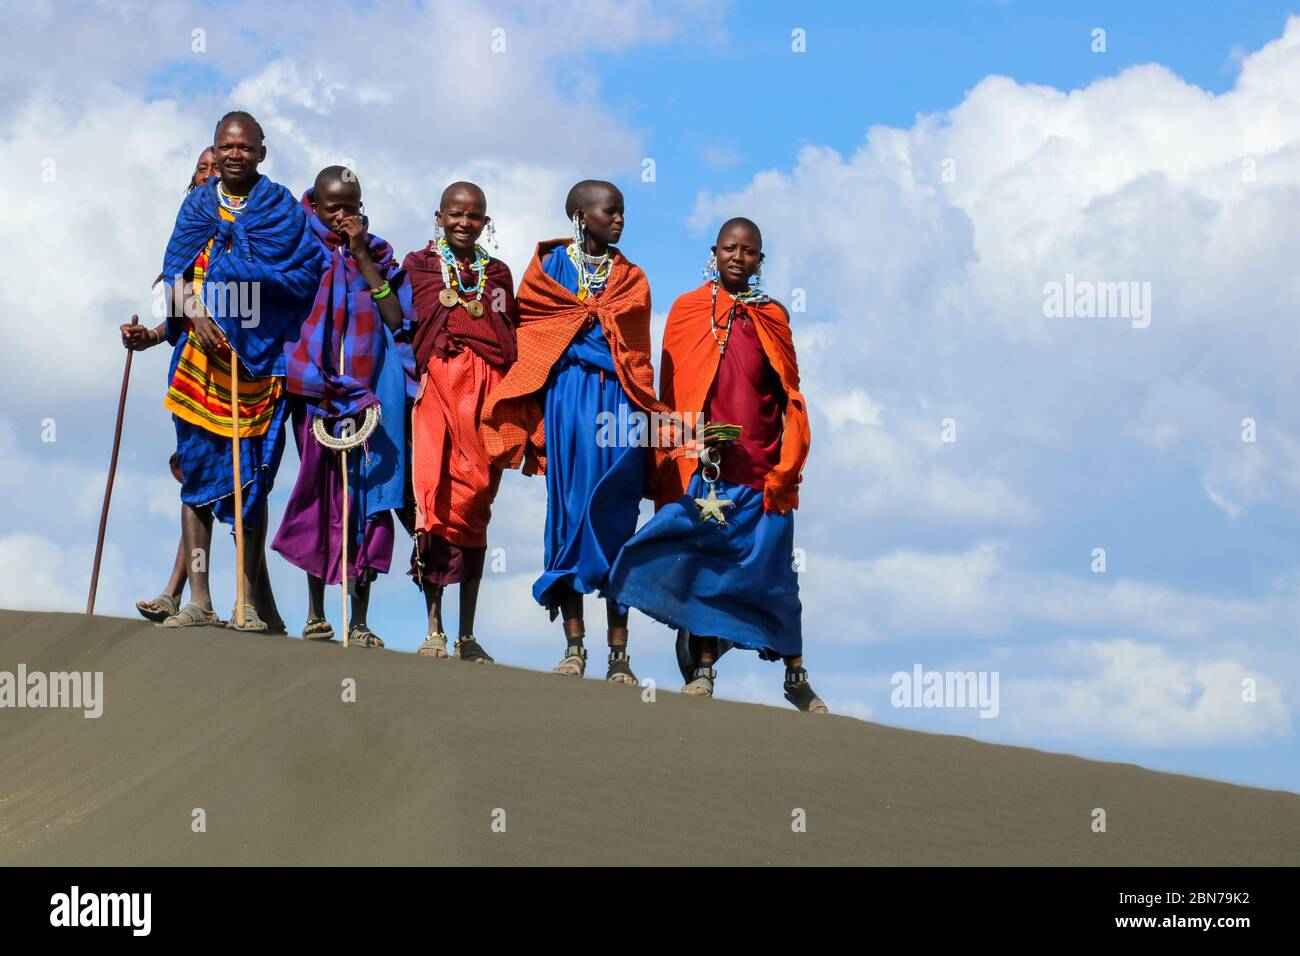 A Group of Maasai women in blue robes. Maasai is an ethnic group of semi-nomadic people. Photographed in Tanzania Stock Photo